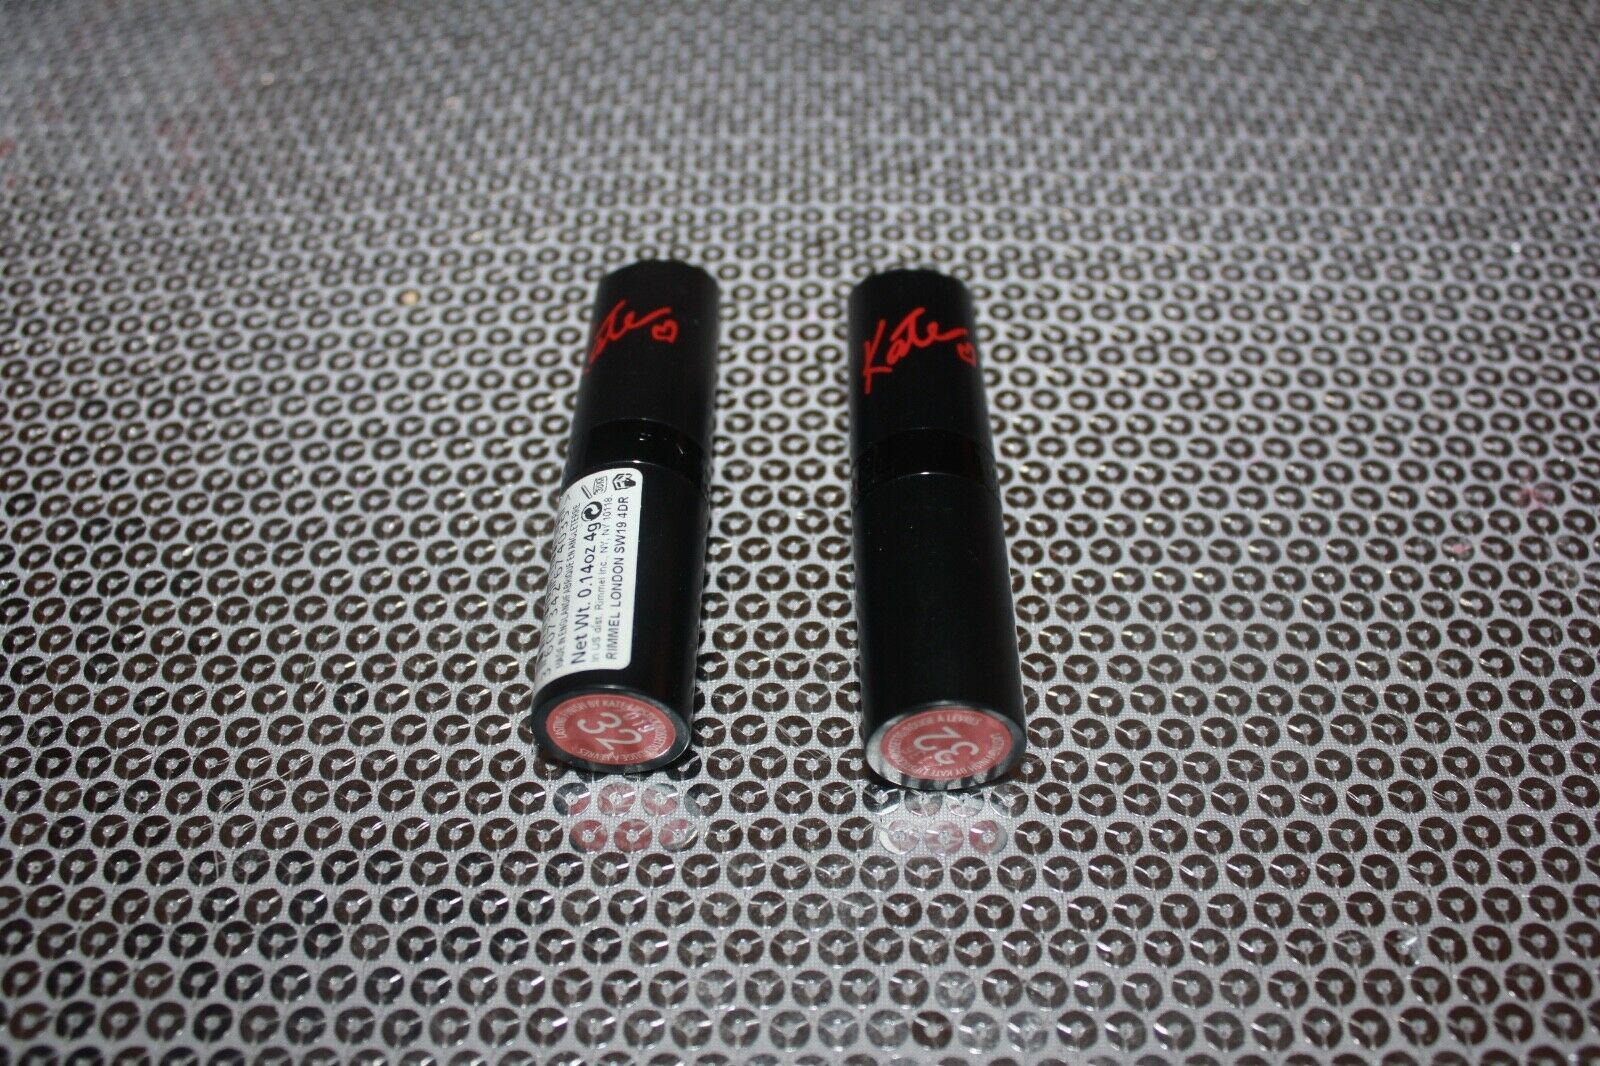 RIMMEL LASTING FINISH BY KATE LIPSTICK #32 ROSSETTO LOT OF 2 NEW